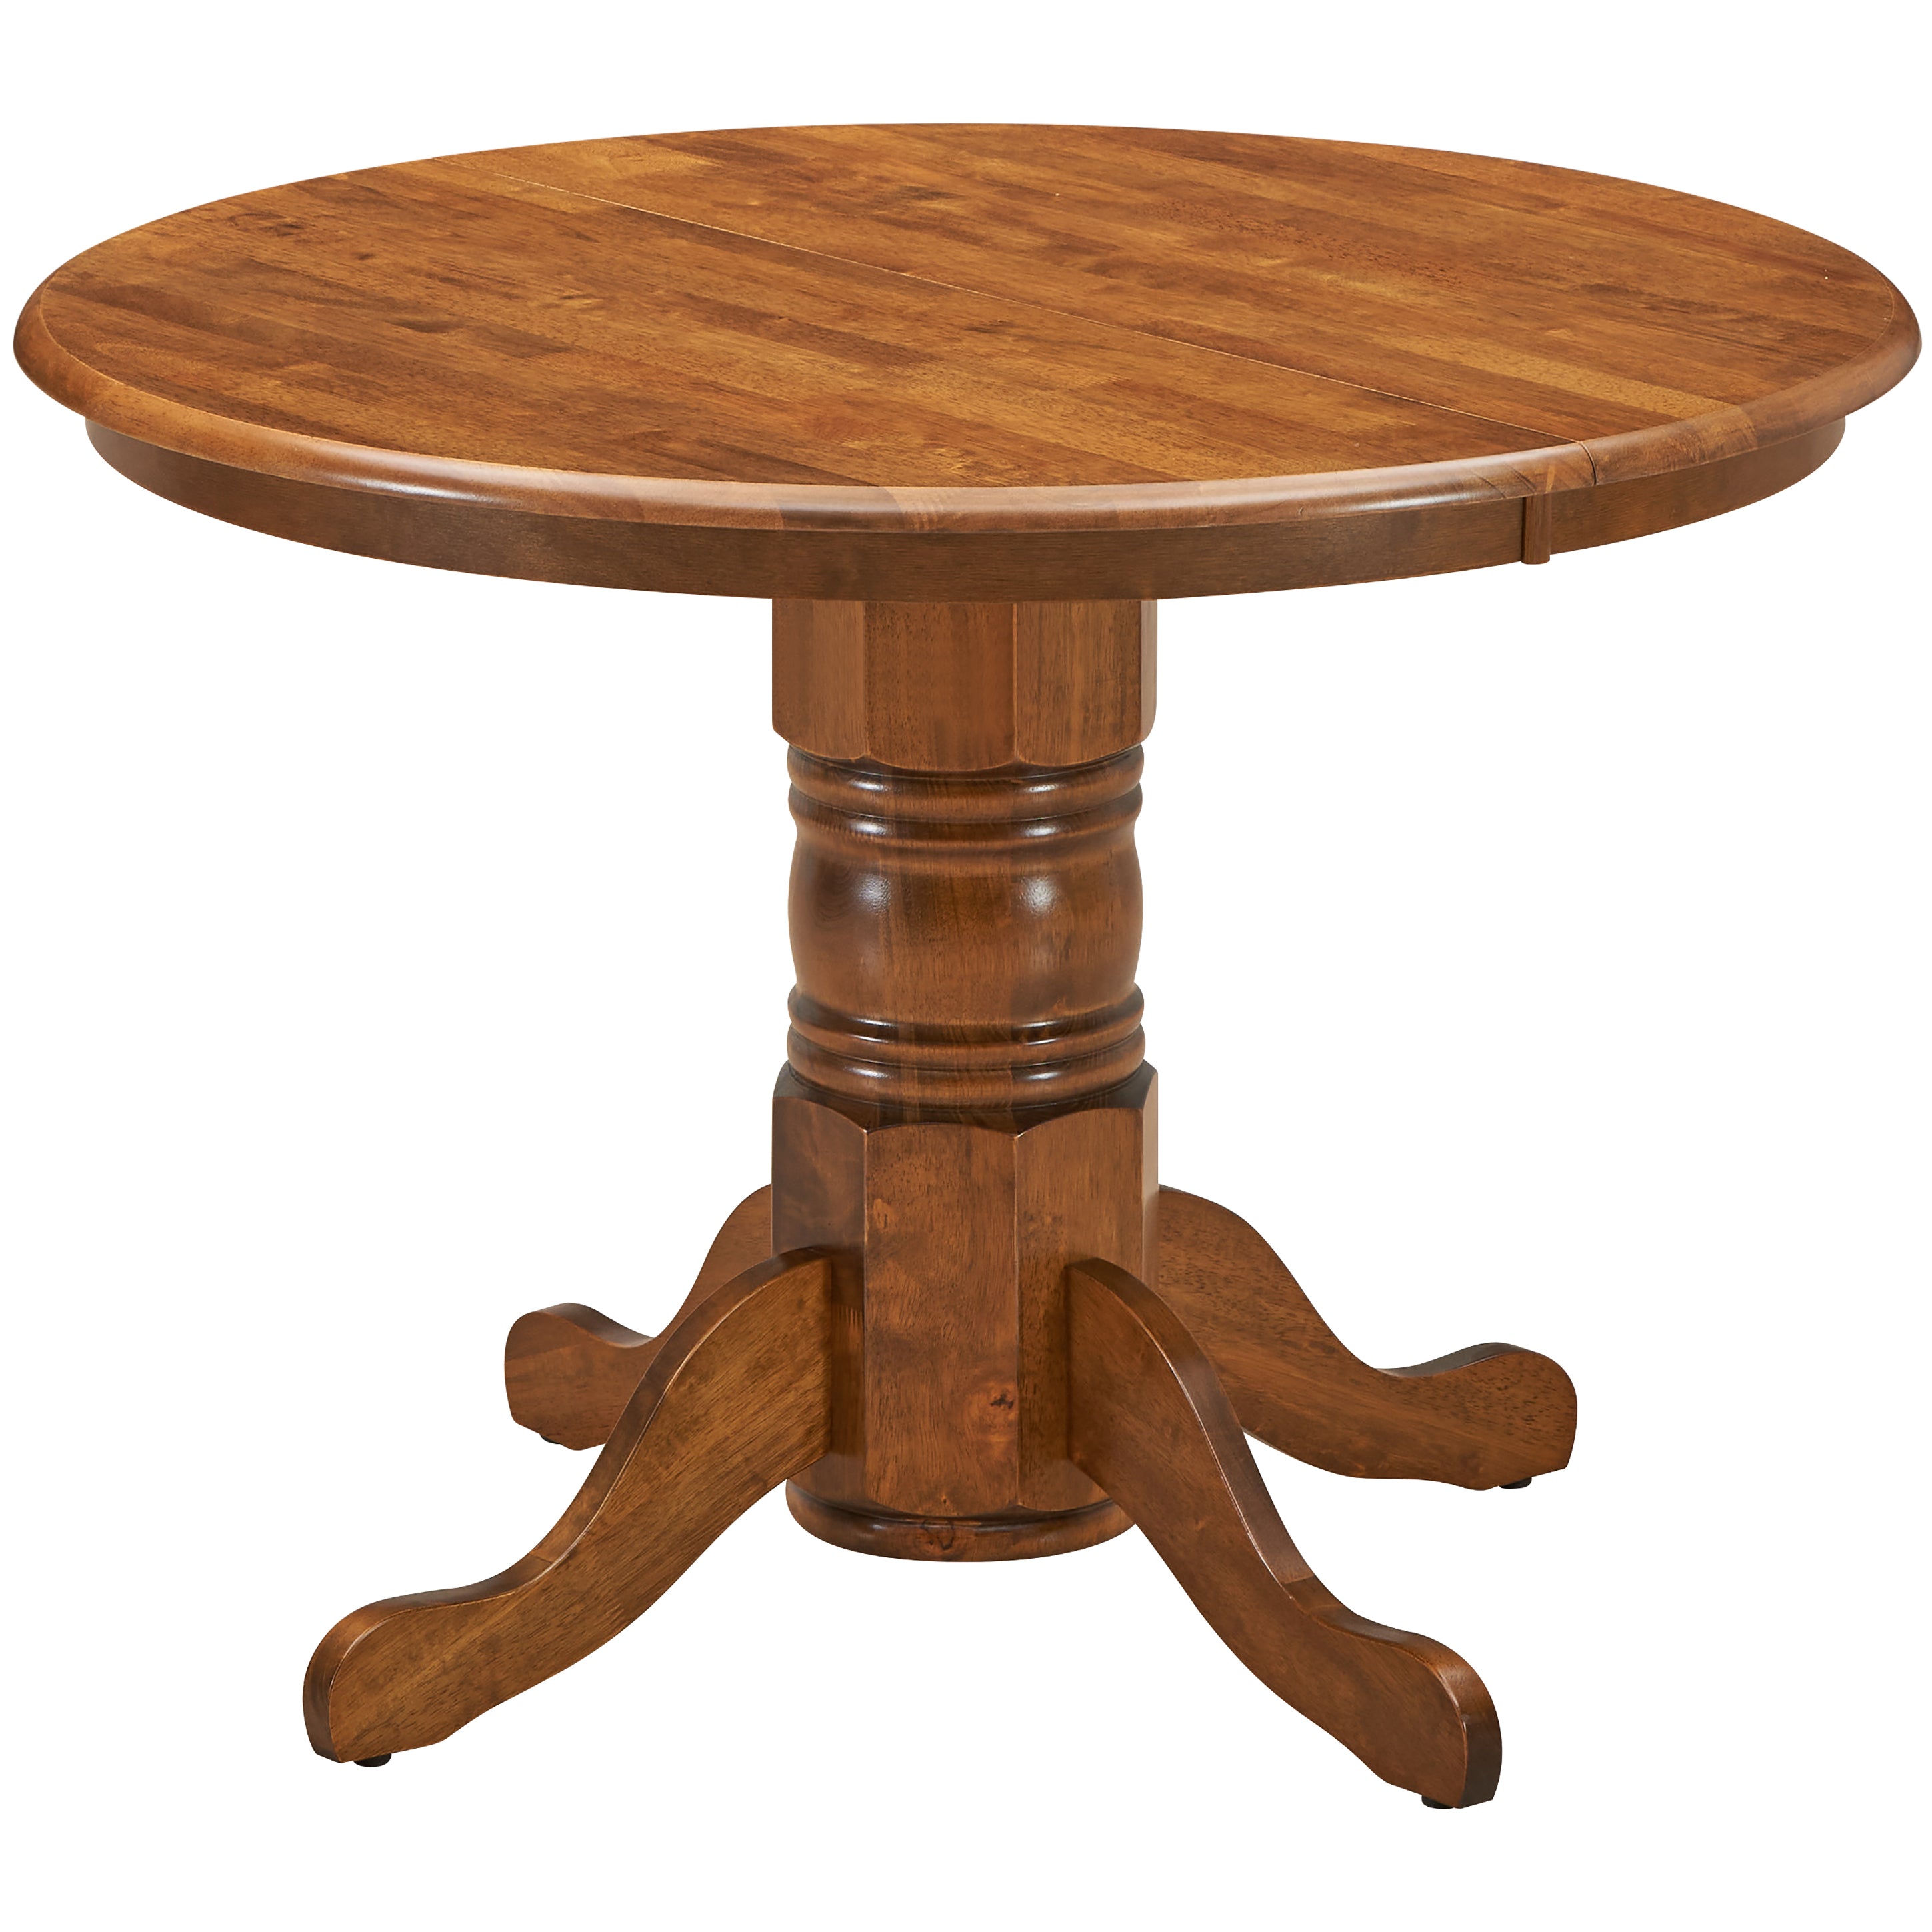 linaria-round-dining-table-106cm-pedestral-stand-solid-rubber-wood-walnut